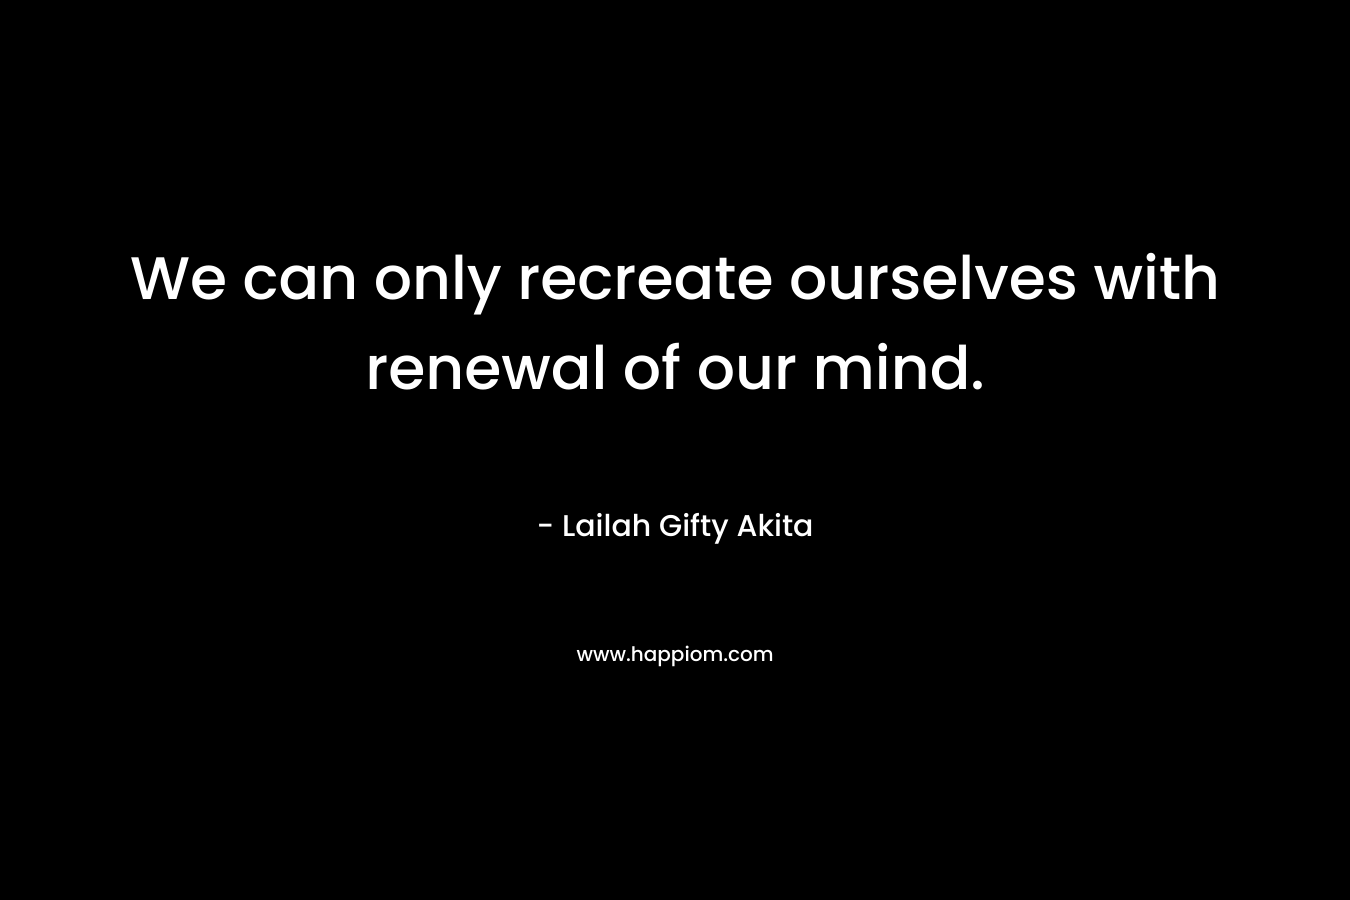 We can only recreate ourselves with renewal of our mind.